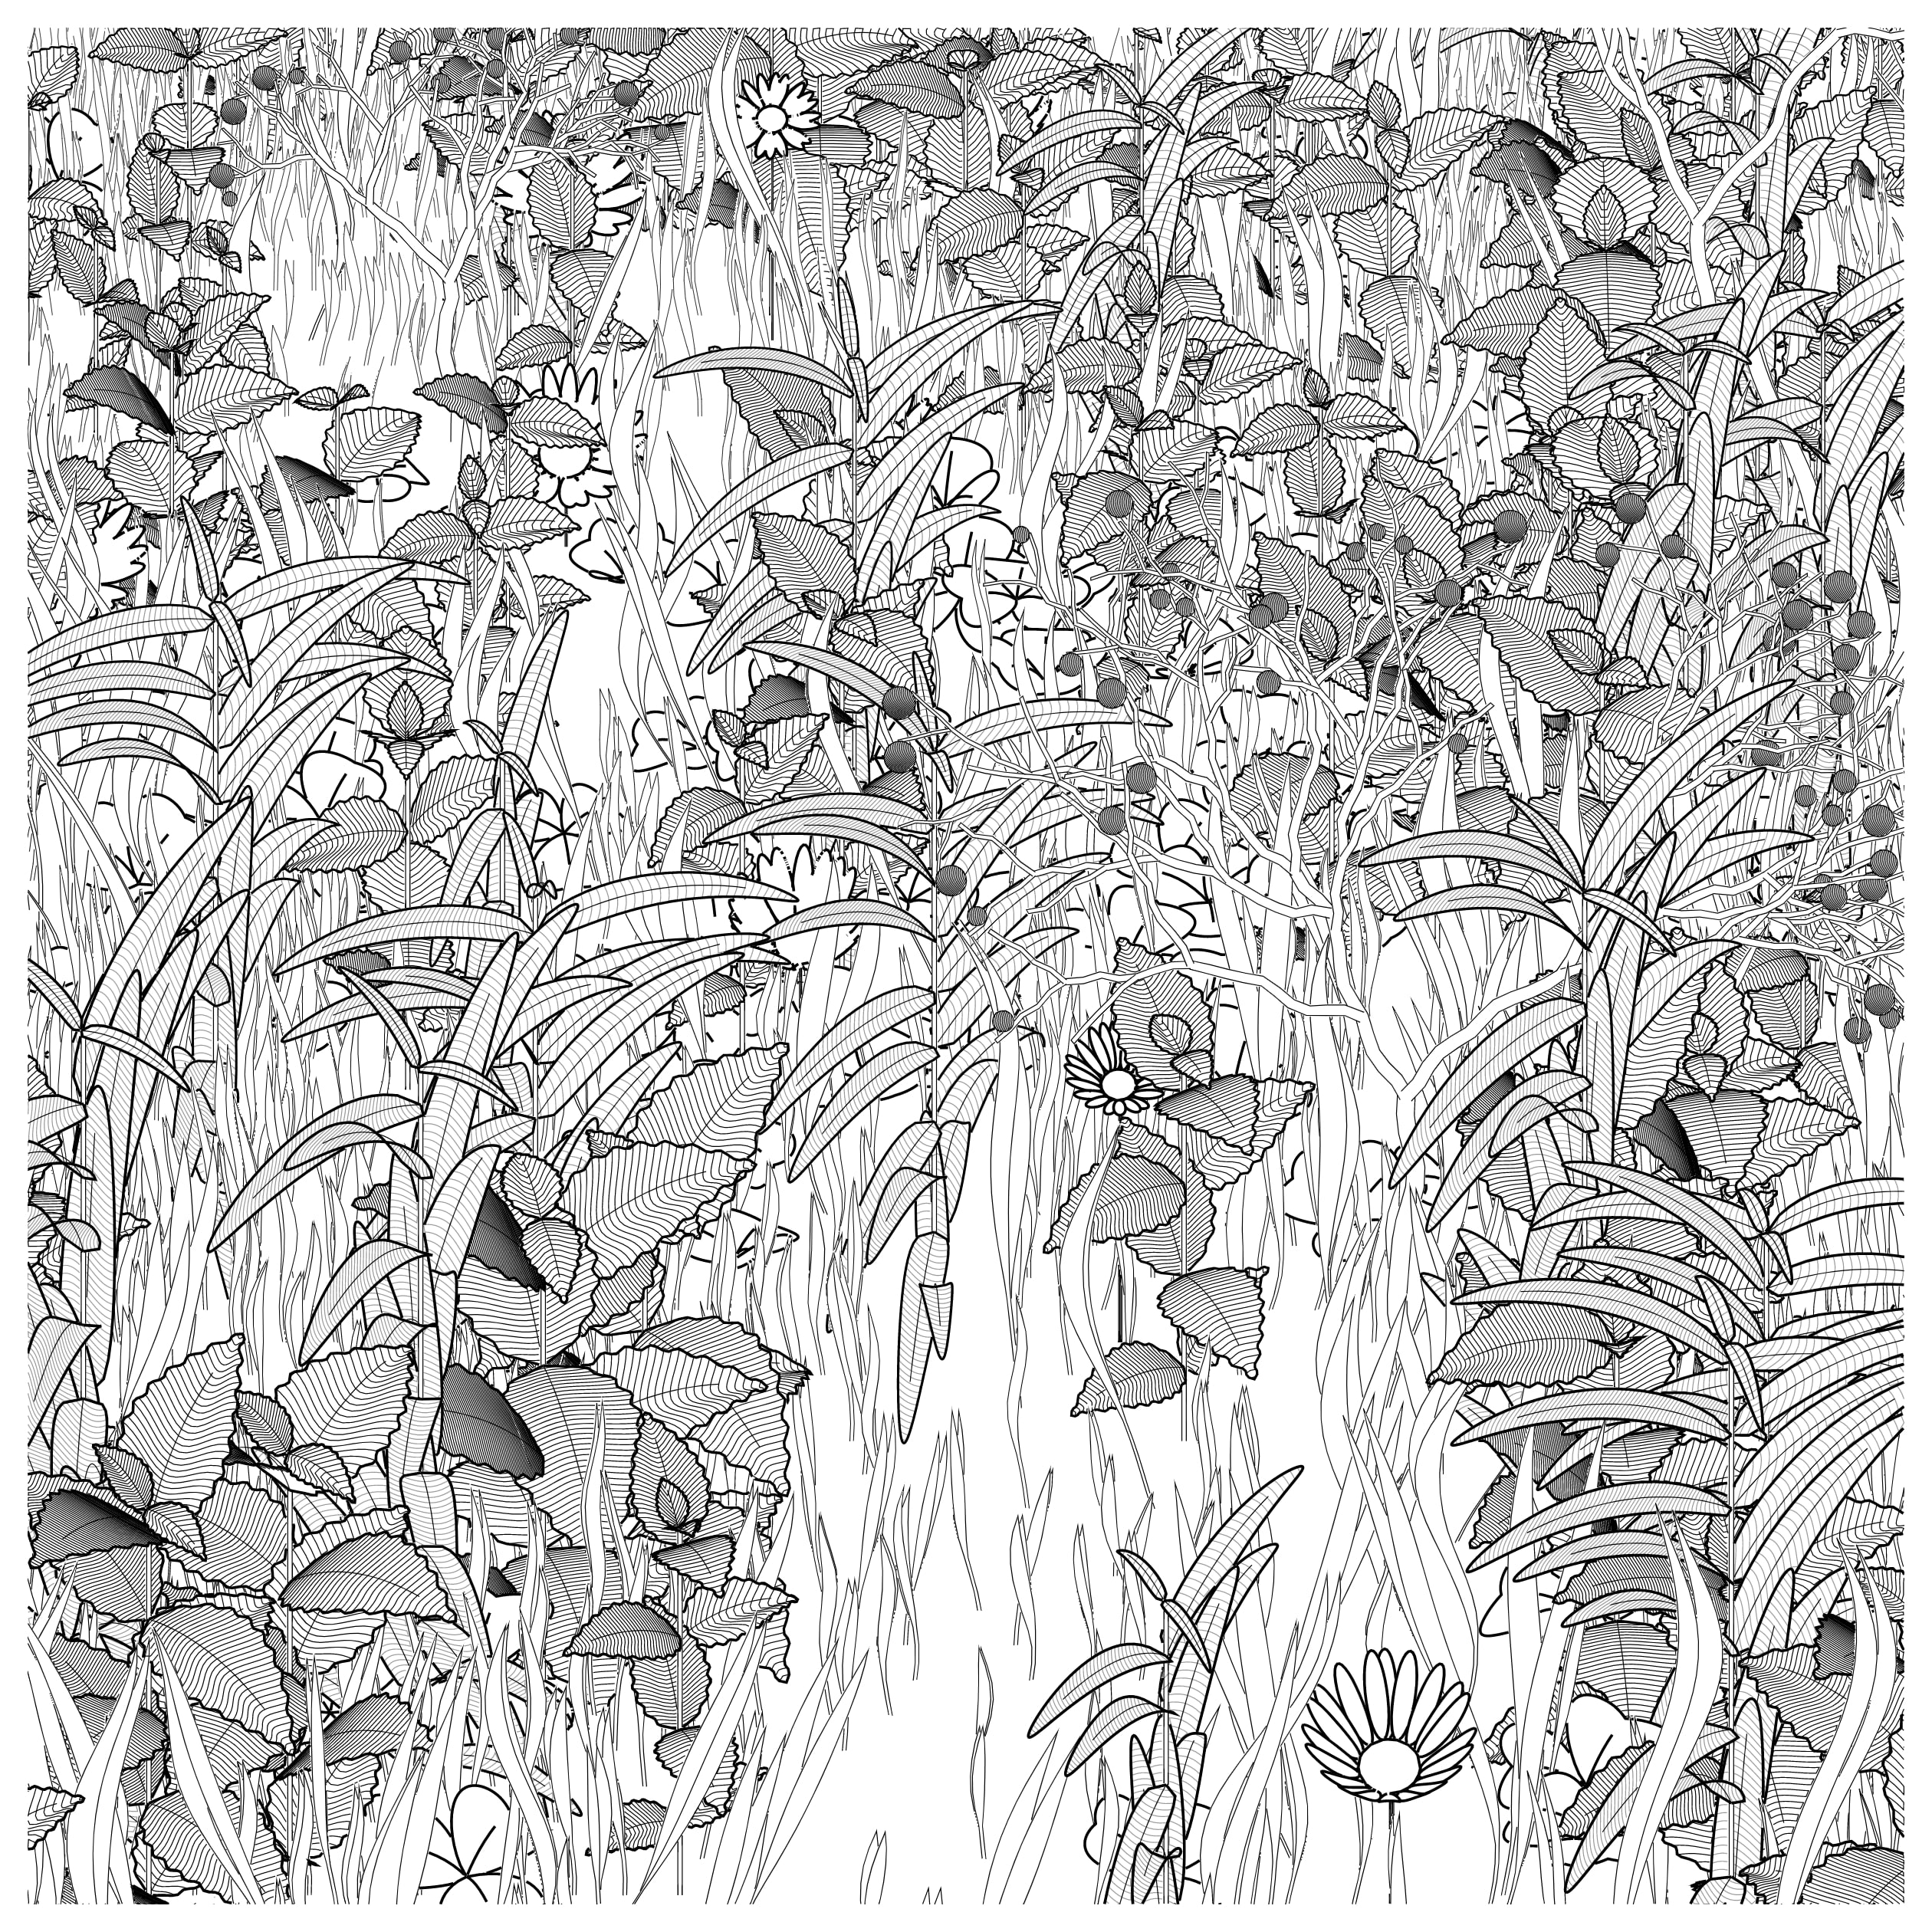 Artist Zancan's NFT featuring various plants in black and white